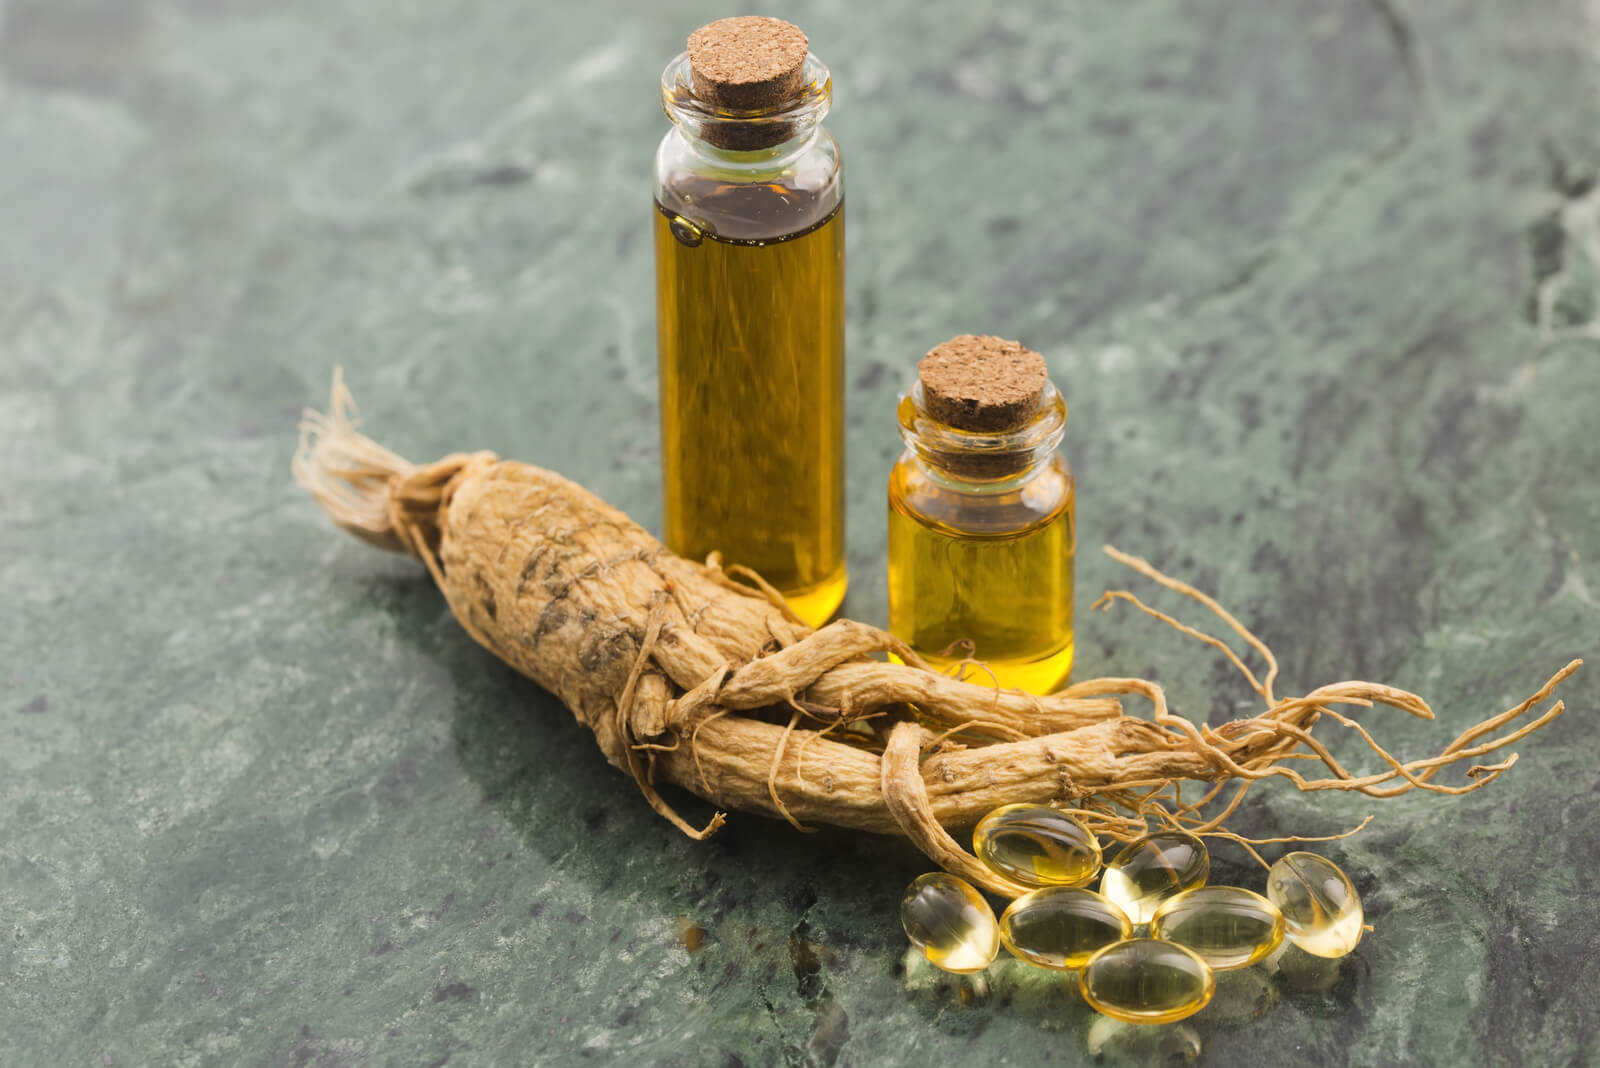 Ginseng root, oil, and ginseng pills (capsules).